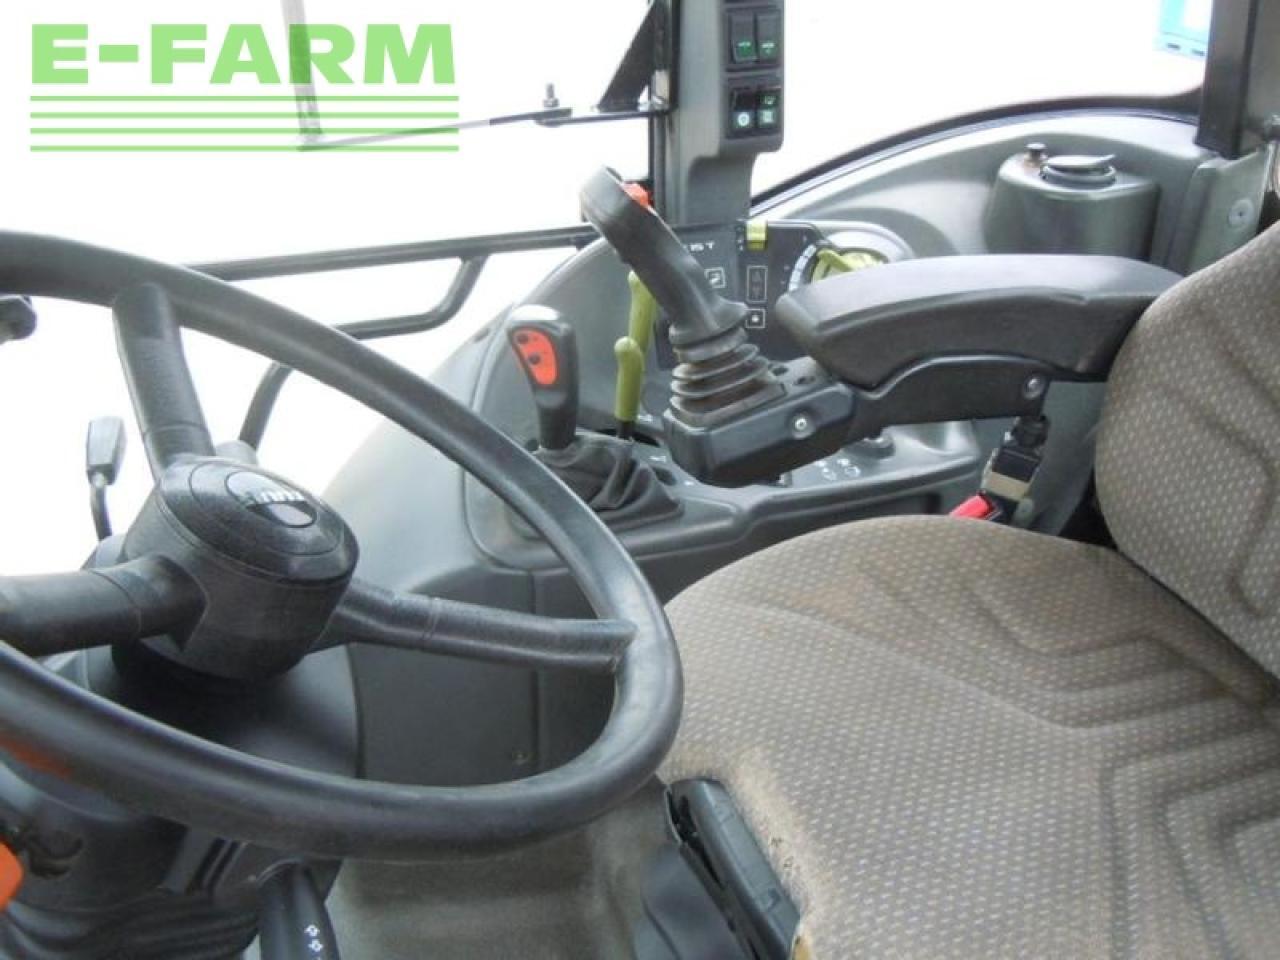 Farm tractor CLAAS arion 410 cis: picture 10